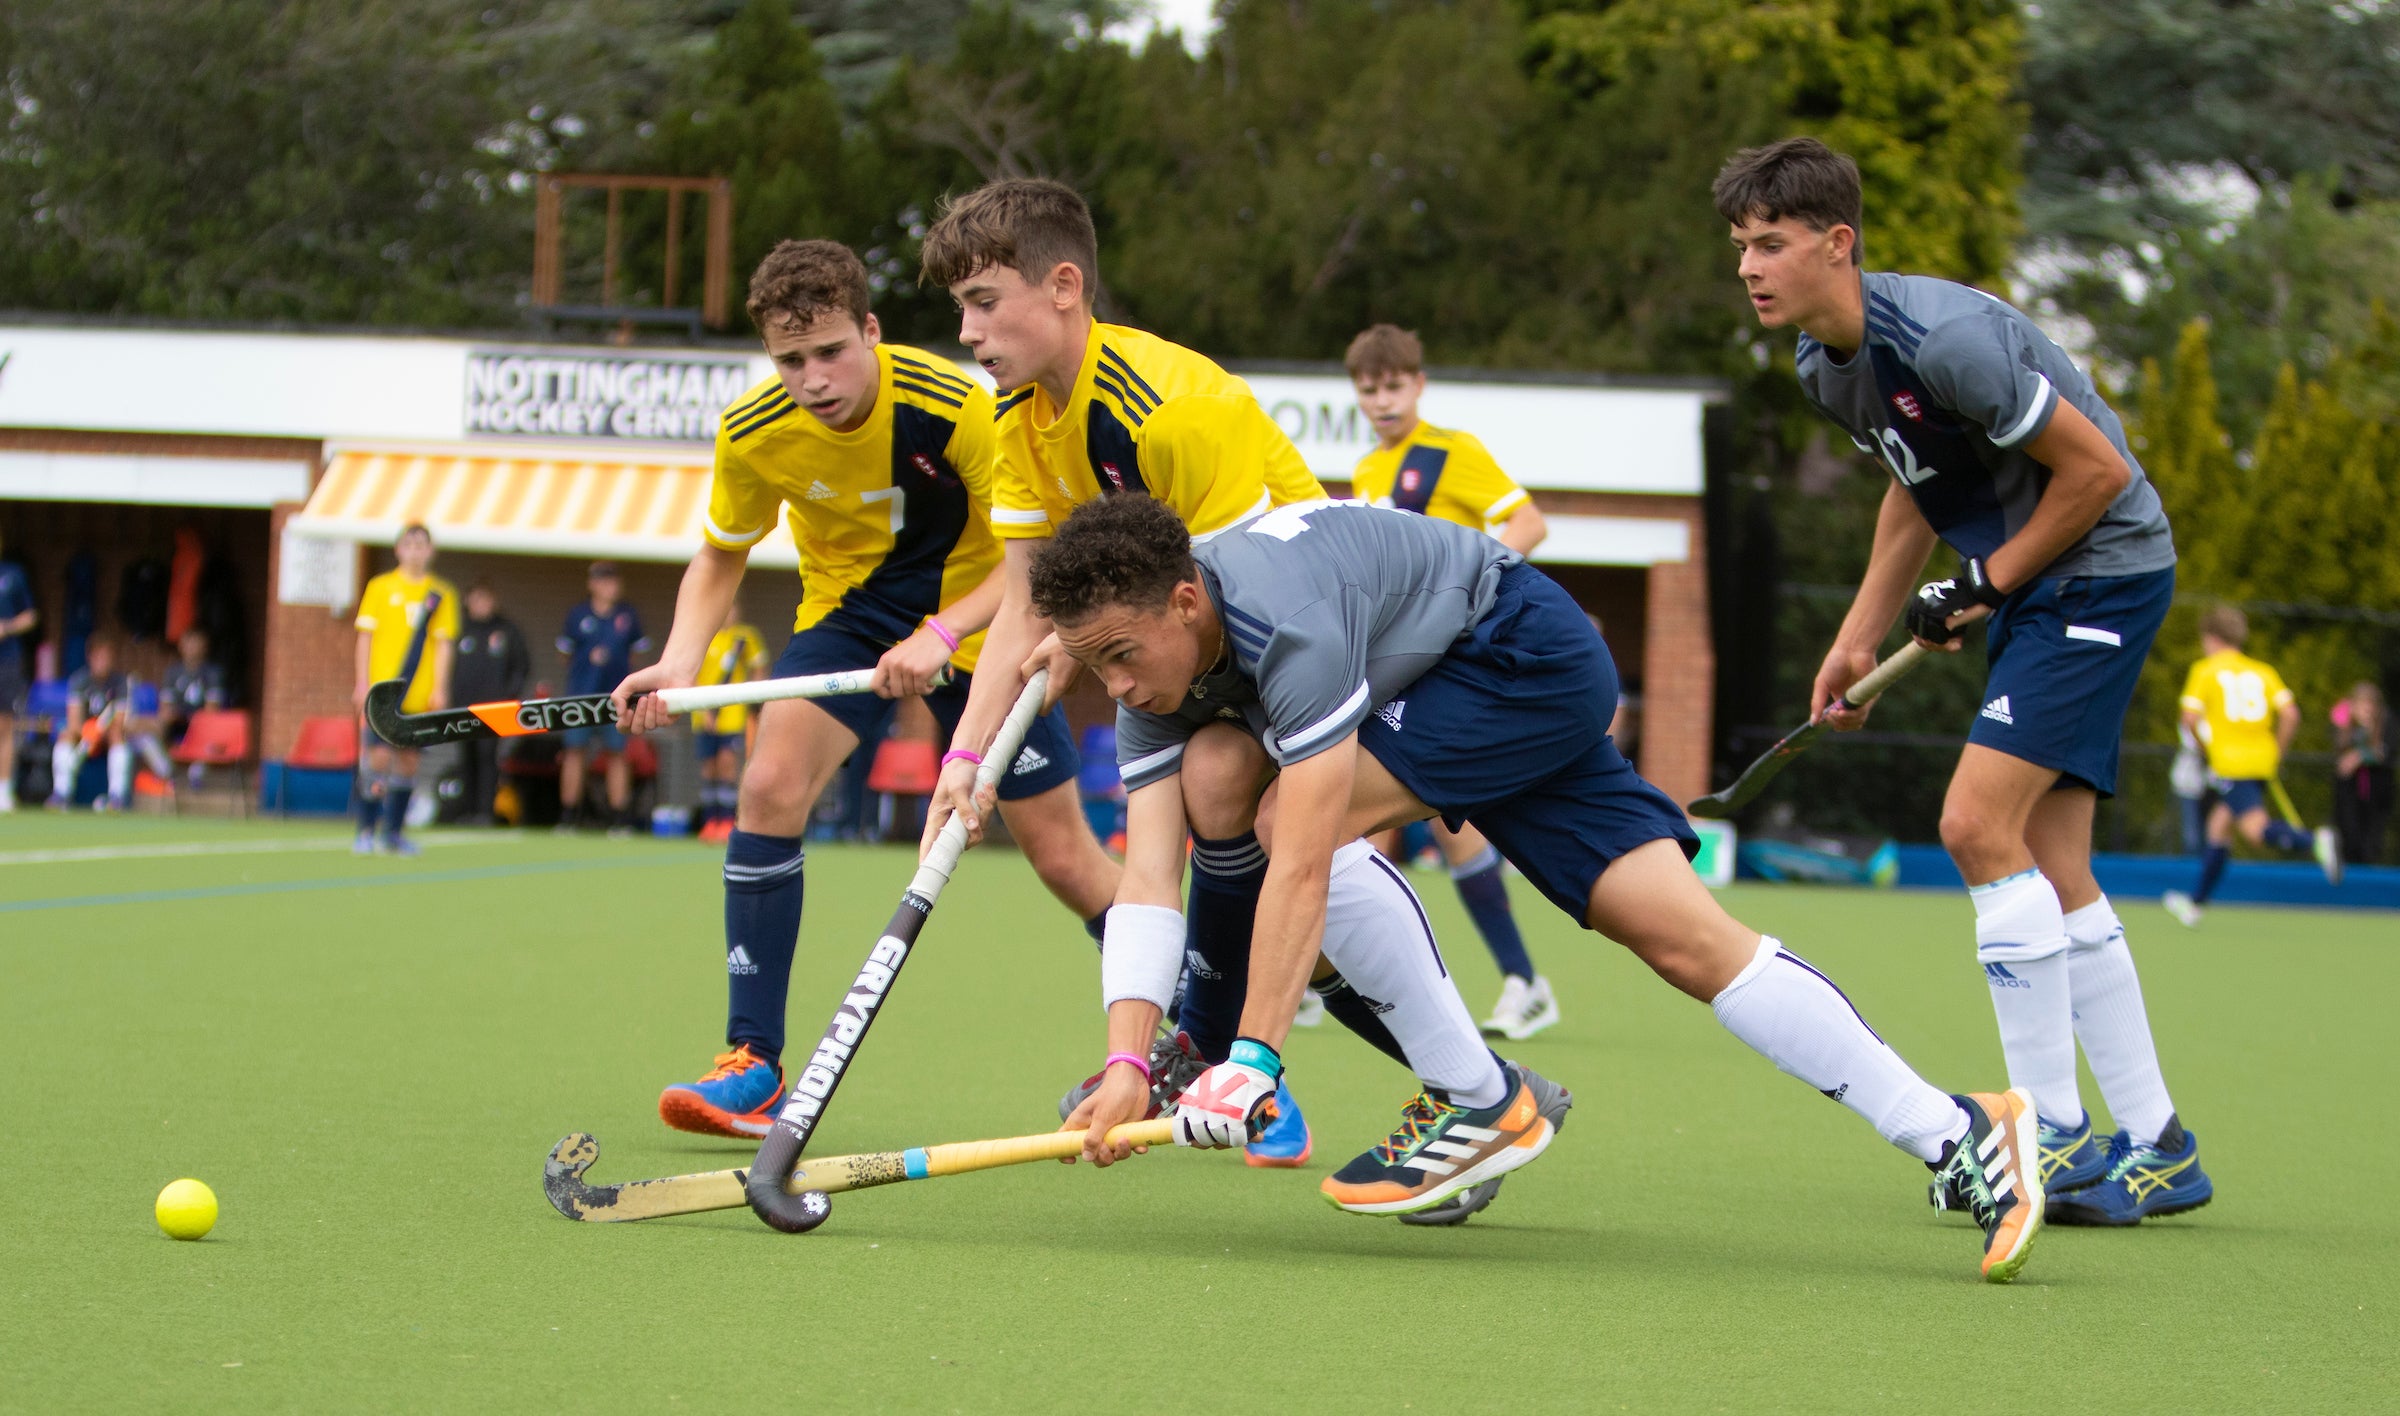 England%20Hockey Challenge%20Cup Boys U15 July%202022 24 - England: Talent Academies get ready for 2023 Festival in Nottingham - Over 3 days from 29th–31st July 2023, Nottingham is set to play host to the England Hockey Talent Academy Festival, presented by Sunbelt Rentals UK and Ireland.  